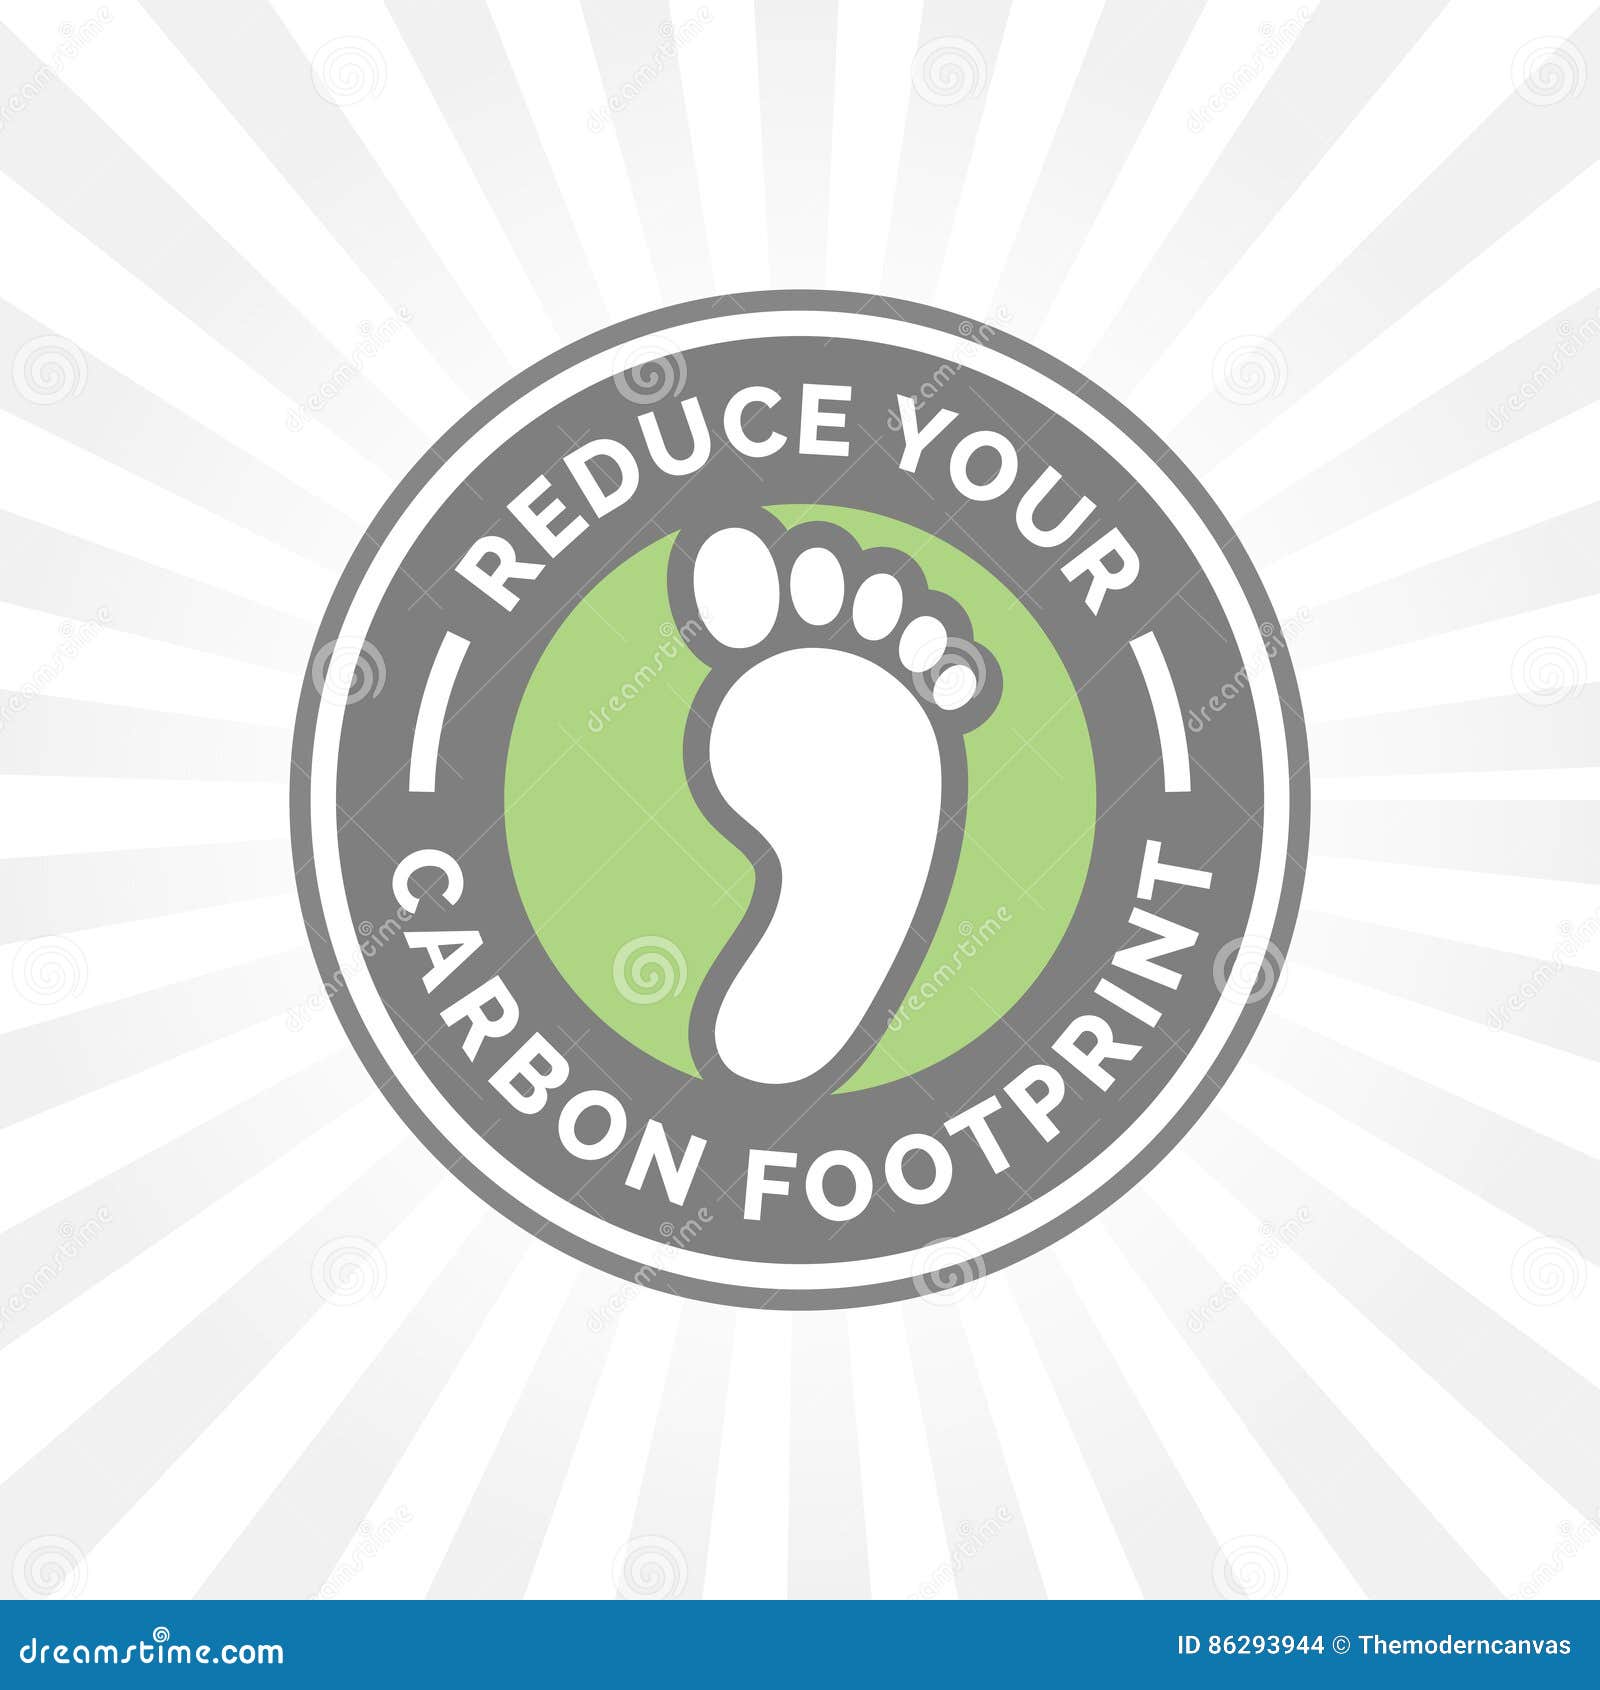 reduce your carbon footprint icon with green environment foot badge